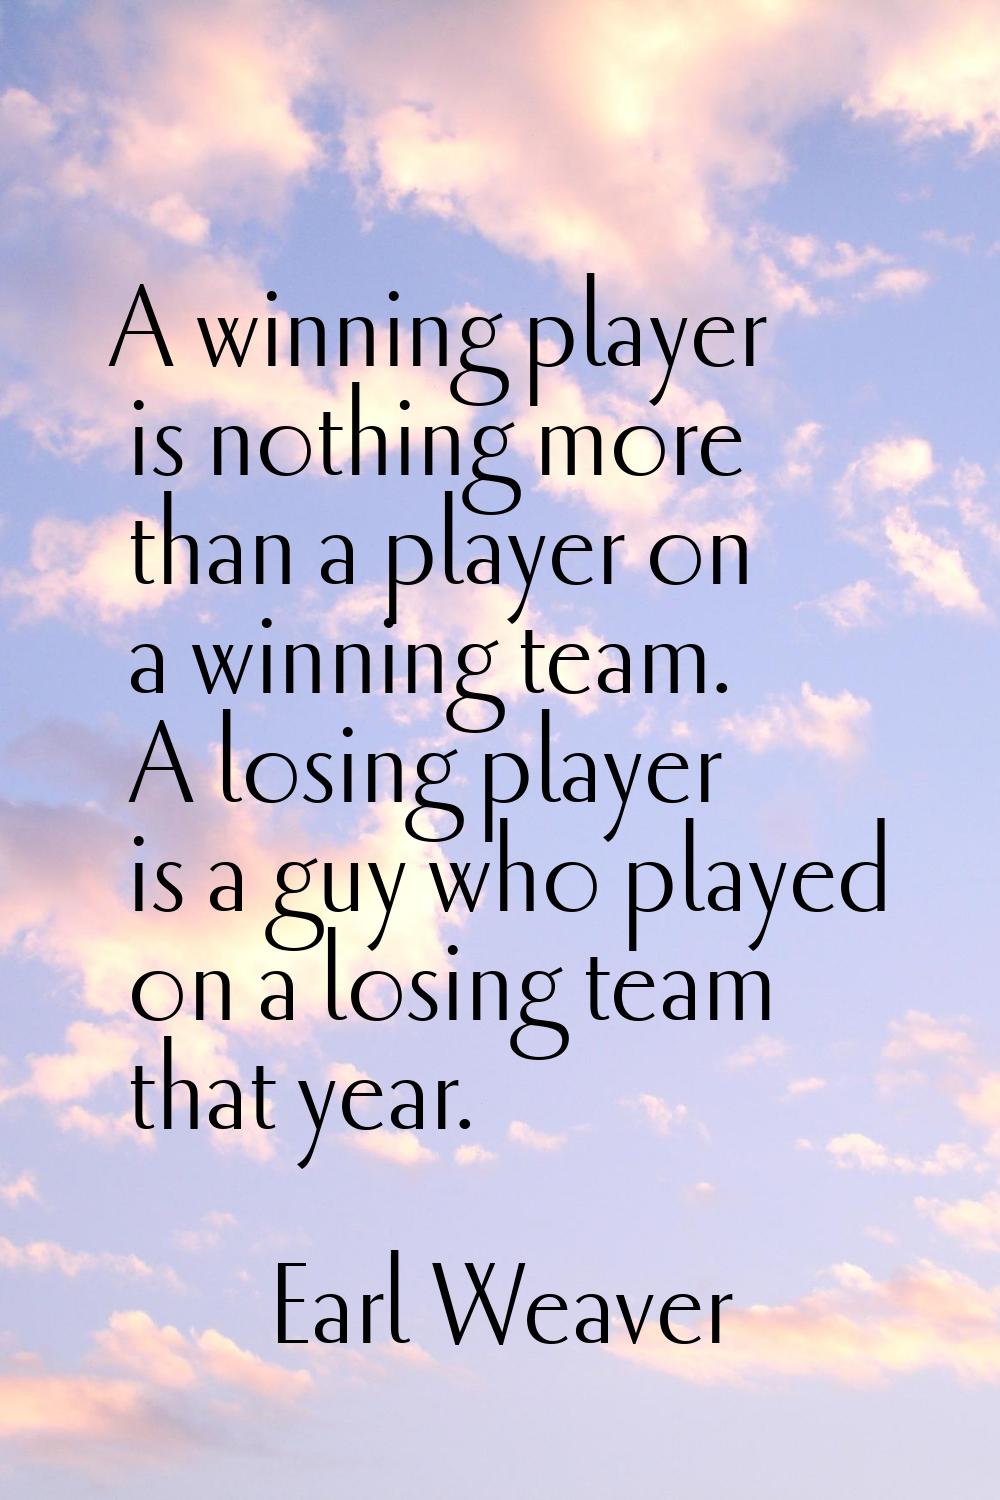 A winning player is nothing more than a player on a winning team. A losing player is a guy who play